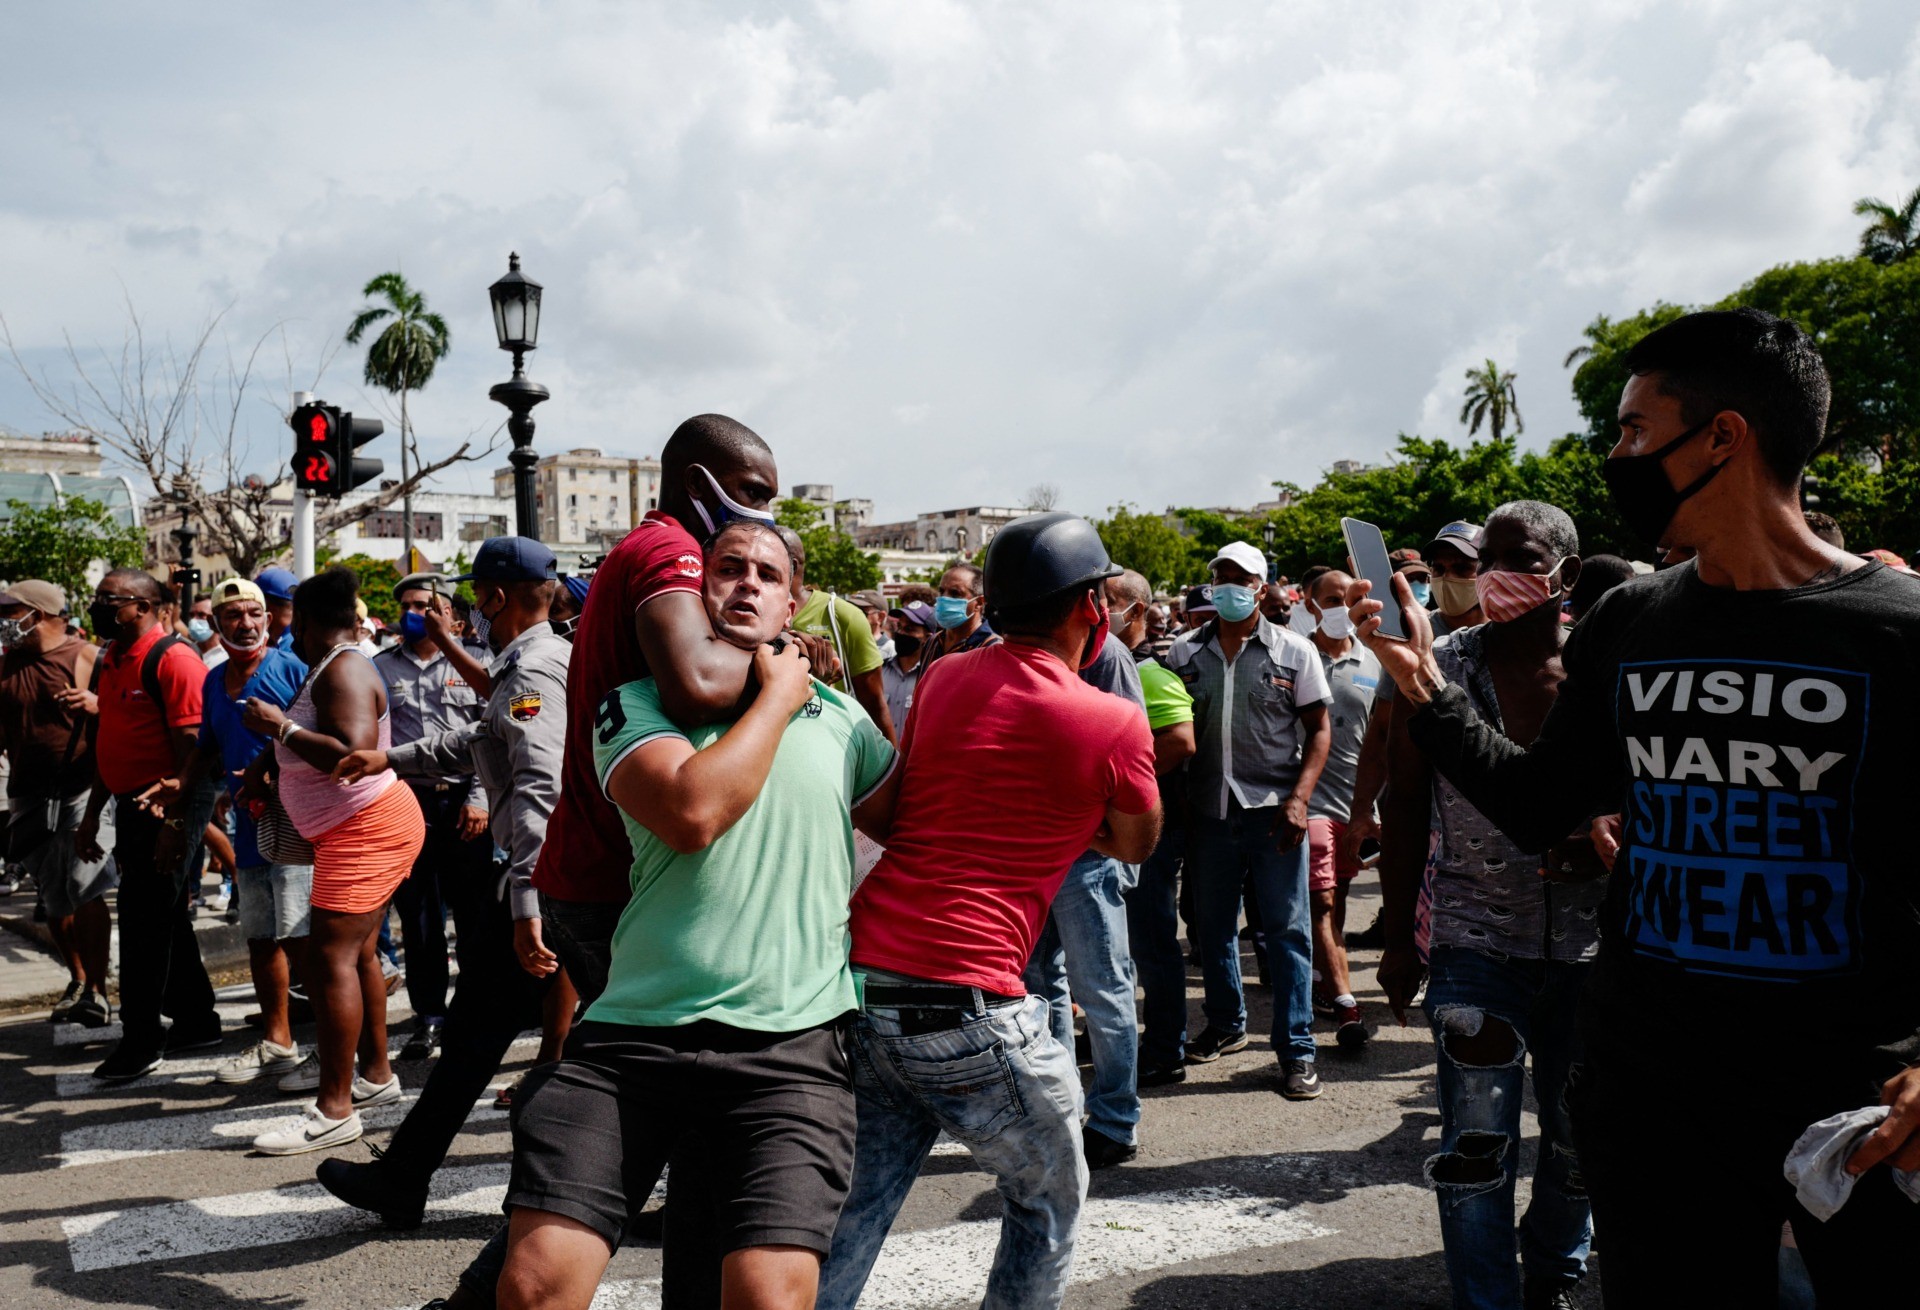 A man is seized by his neck during a demonstration against the government of Cuban President Miguel Diaz-Canel in Havana, on July 11, 2021. - Thousands of Cubans took part in rare protests Sunday against the communist government, marching through a town chanting "Down with the dictatorship" and "We want liberty." (Photo by ADALBERTO ROQUE / AFP) (Photo by ADALBERTO ROQUE/AFP via Getty Images)